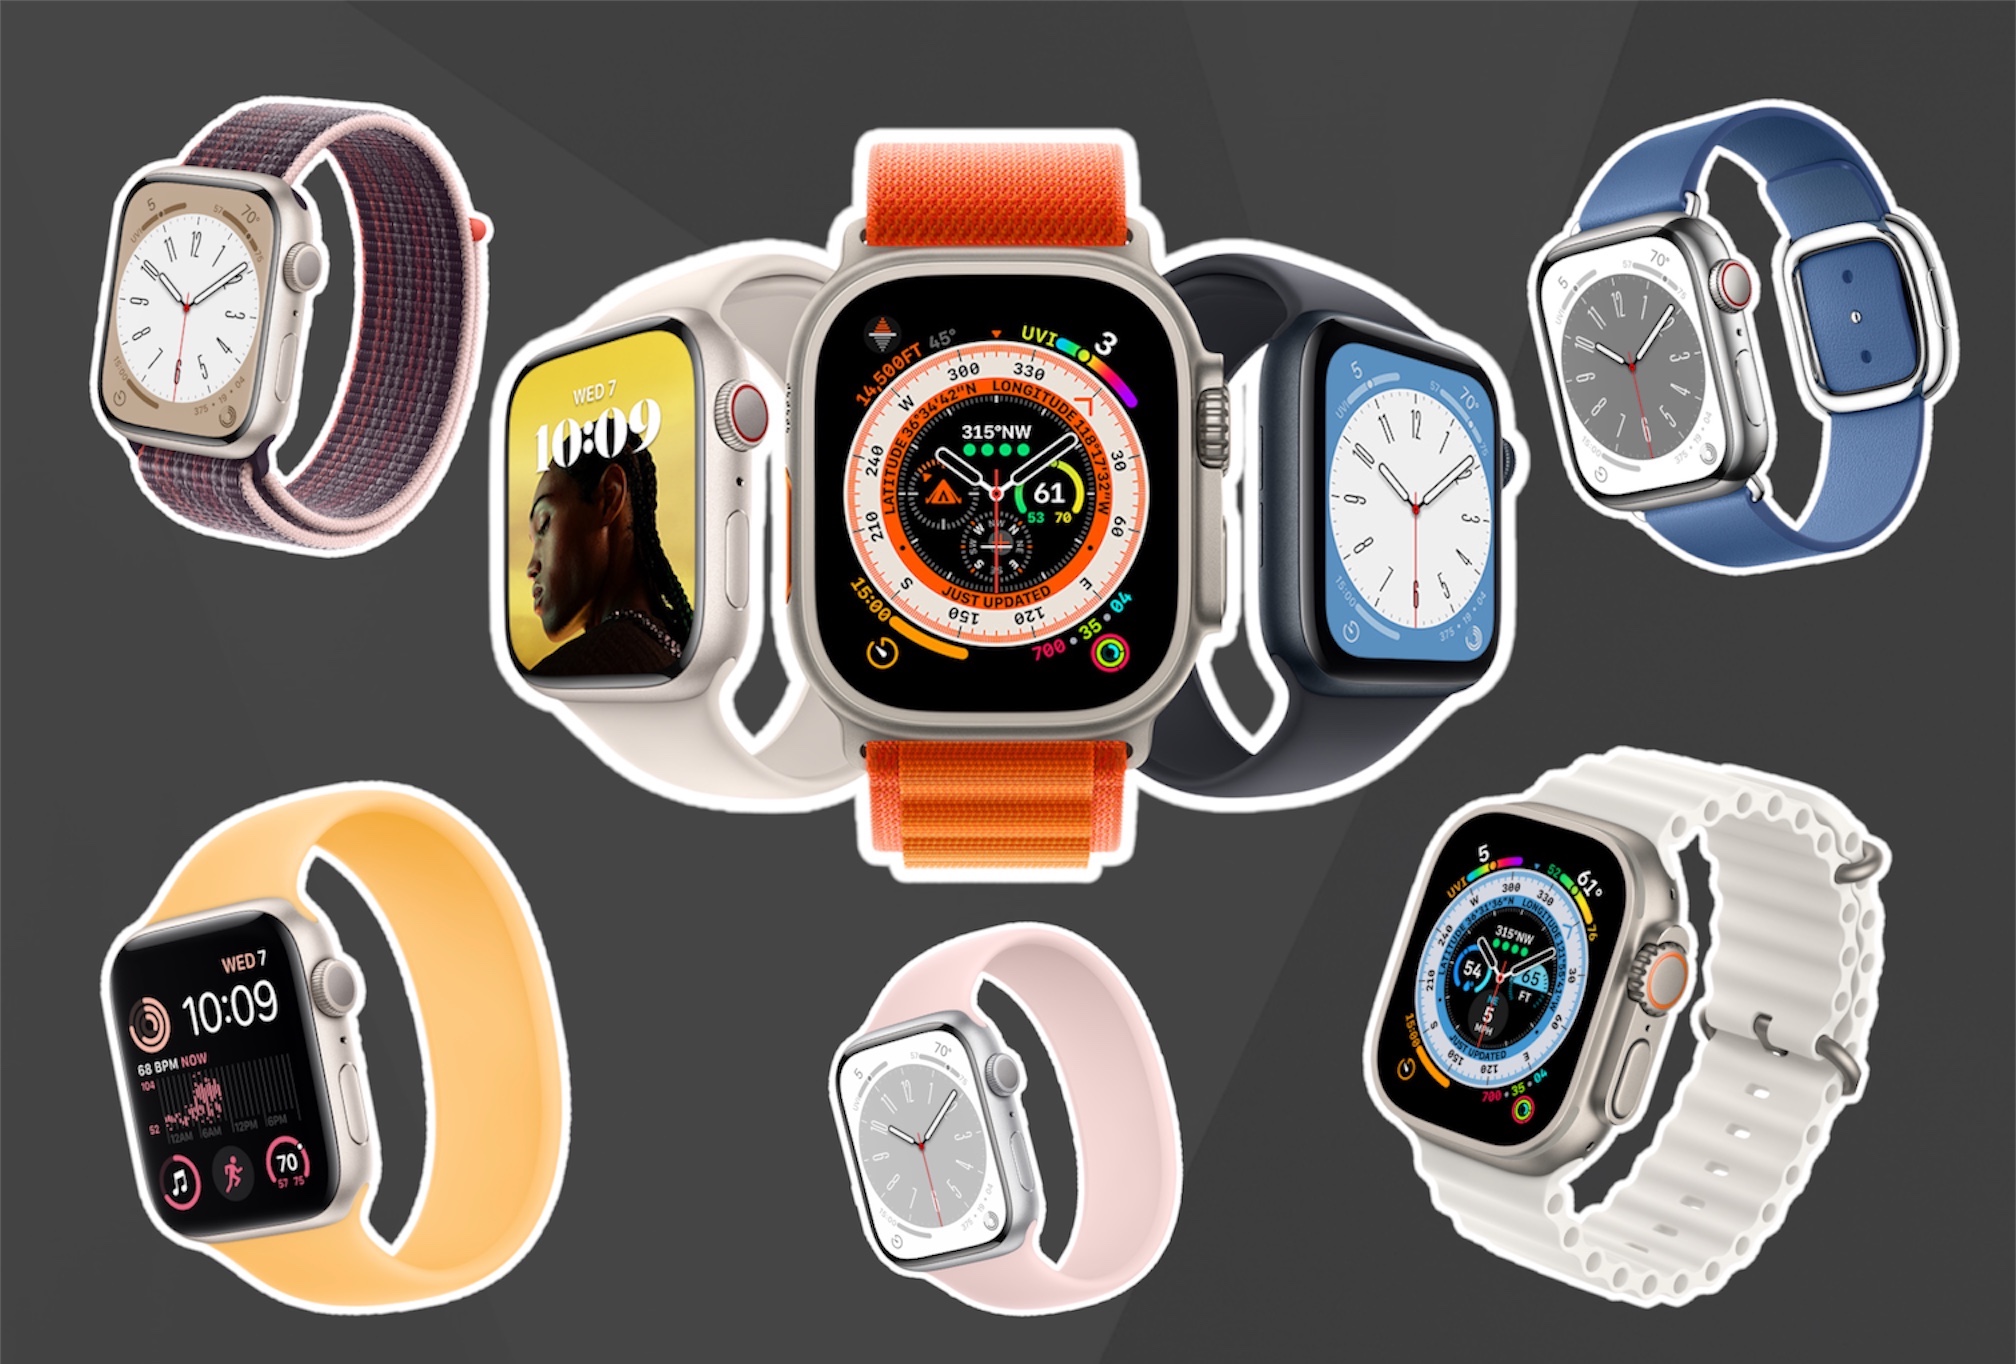 Apples Watches